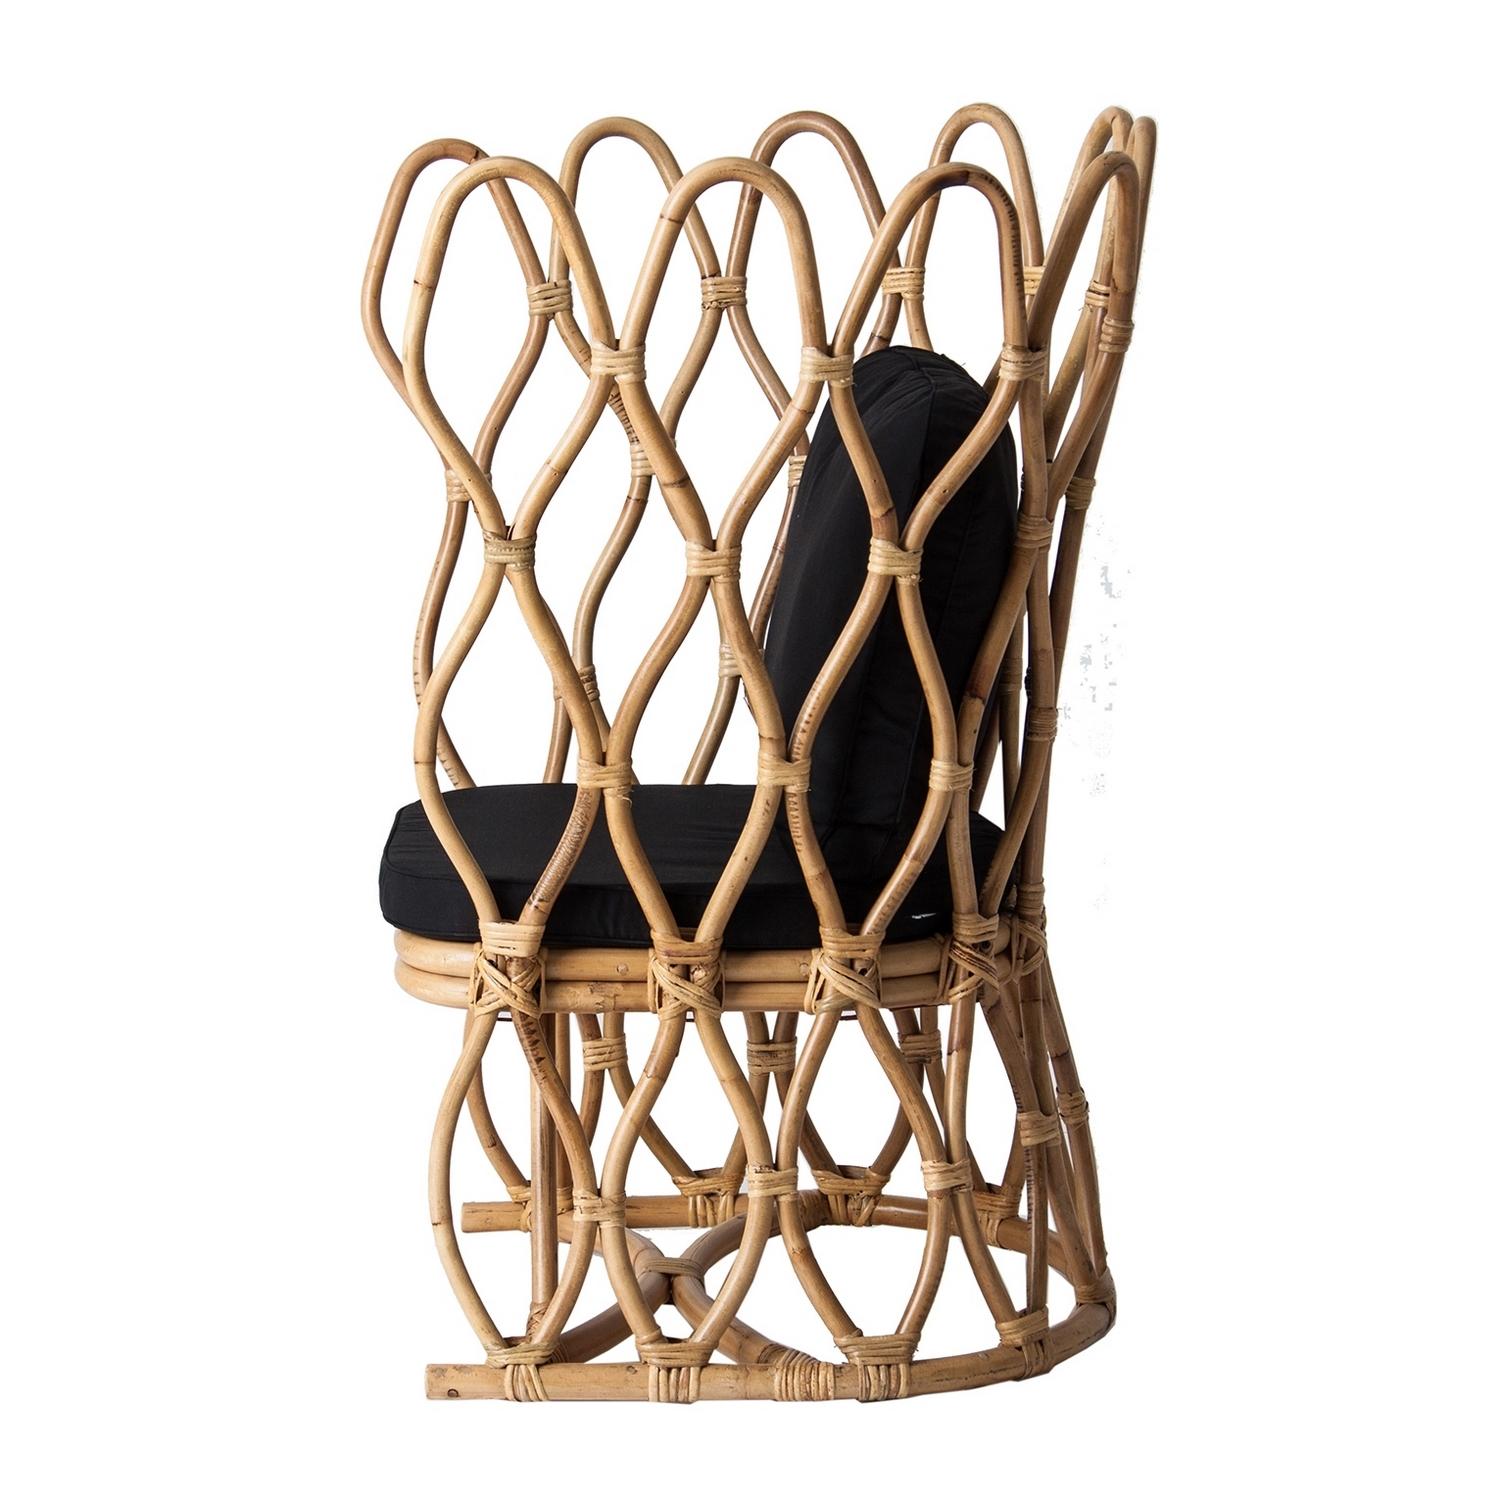 Design and original lounge armchair with a natural rattan airy structure.